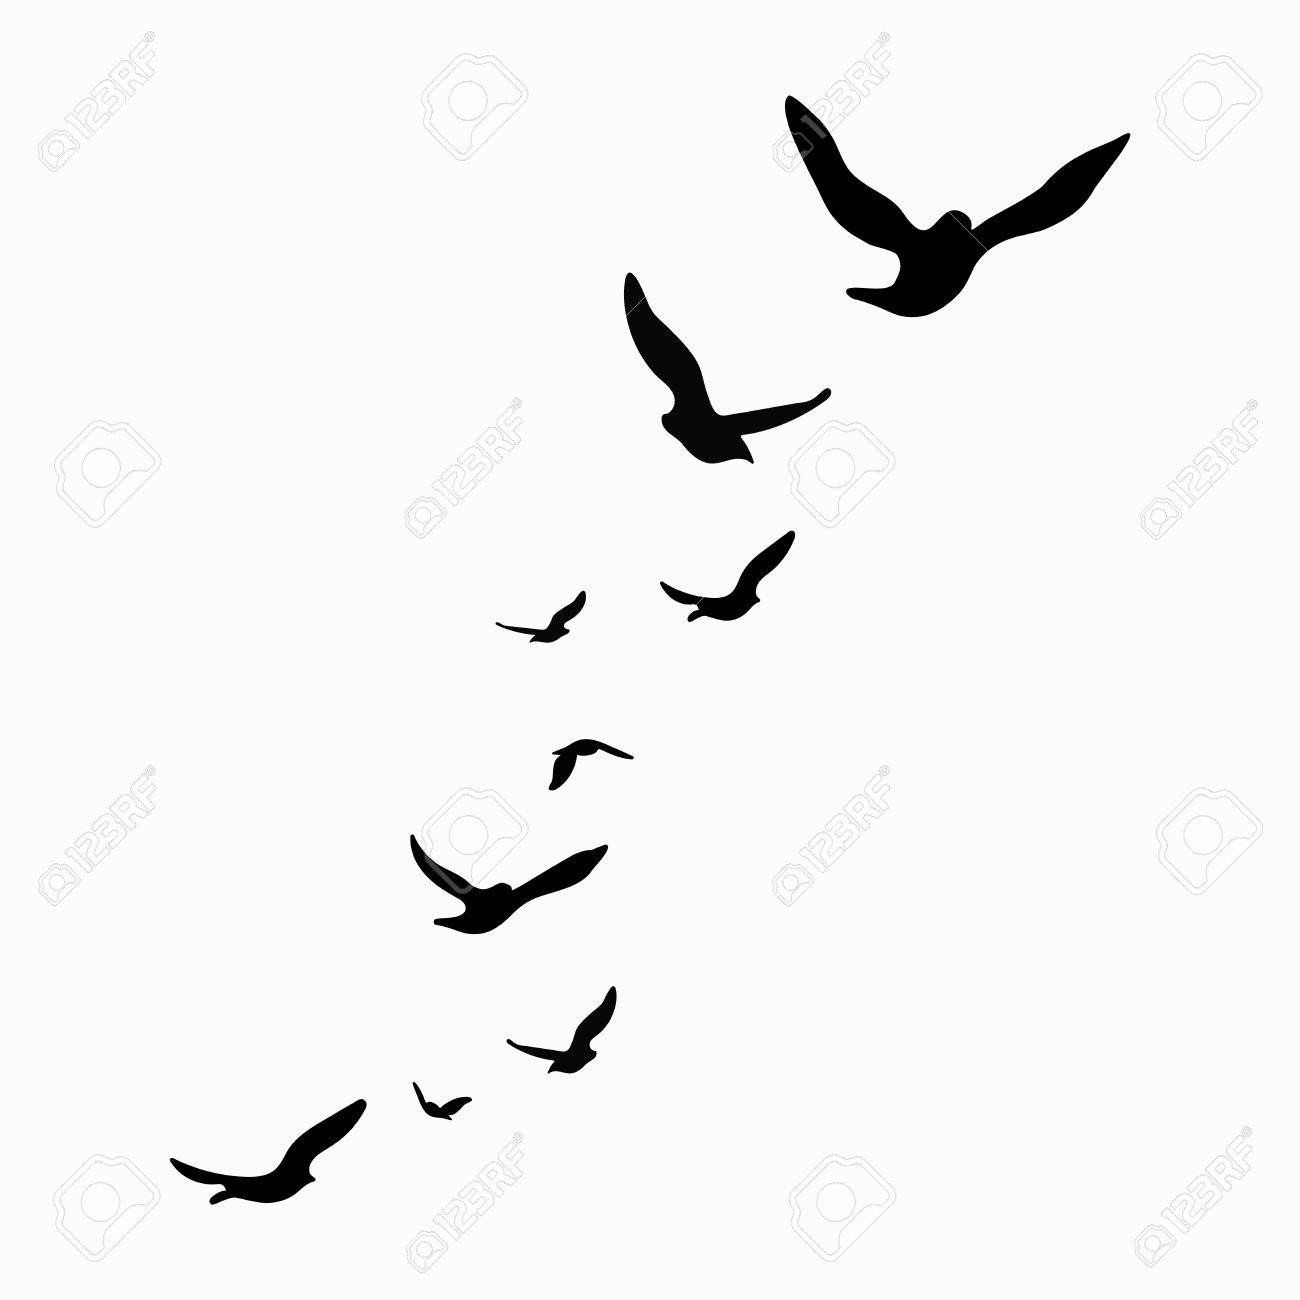 Silhouette Of A Flock Of Birds Black Contours Of Flying Birds pertaining to size 1300 X 1300